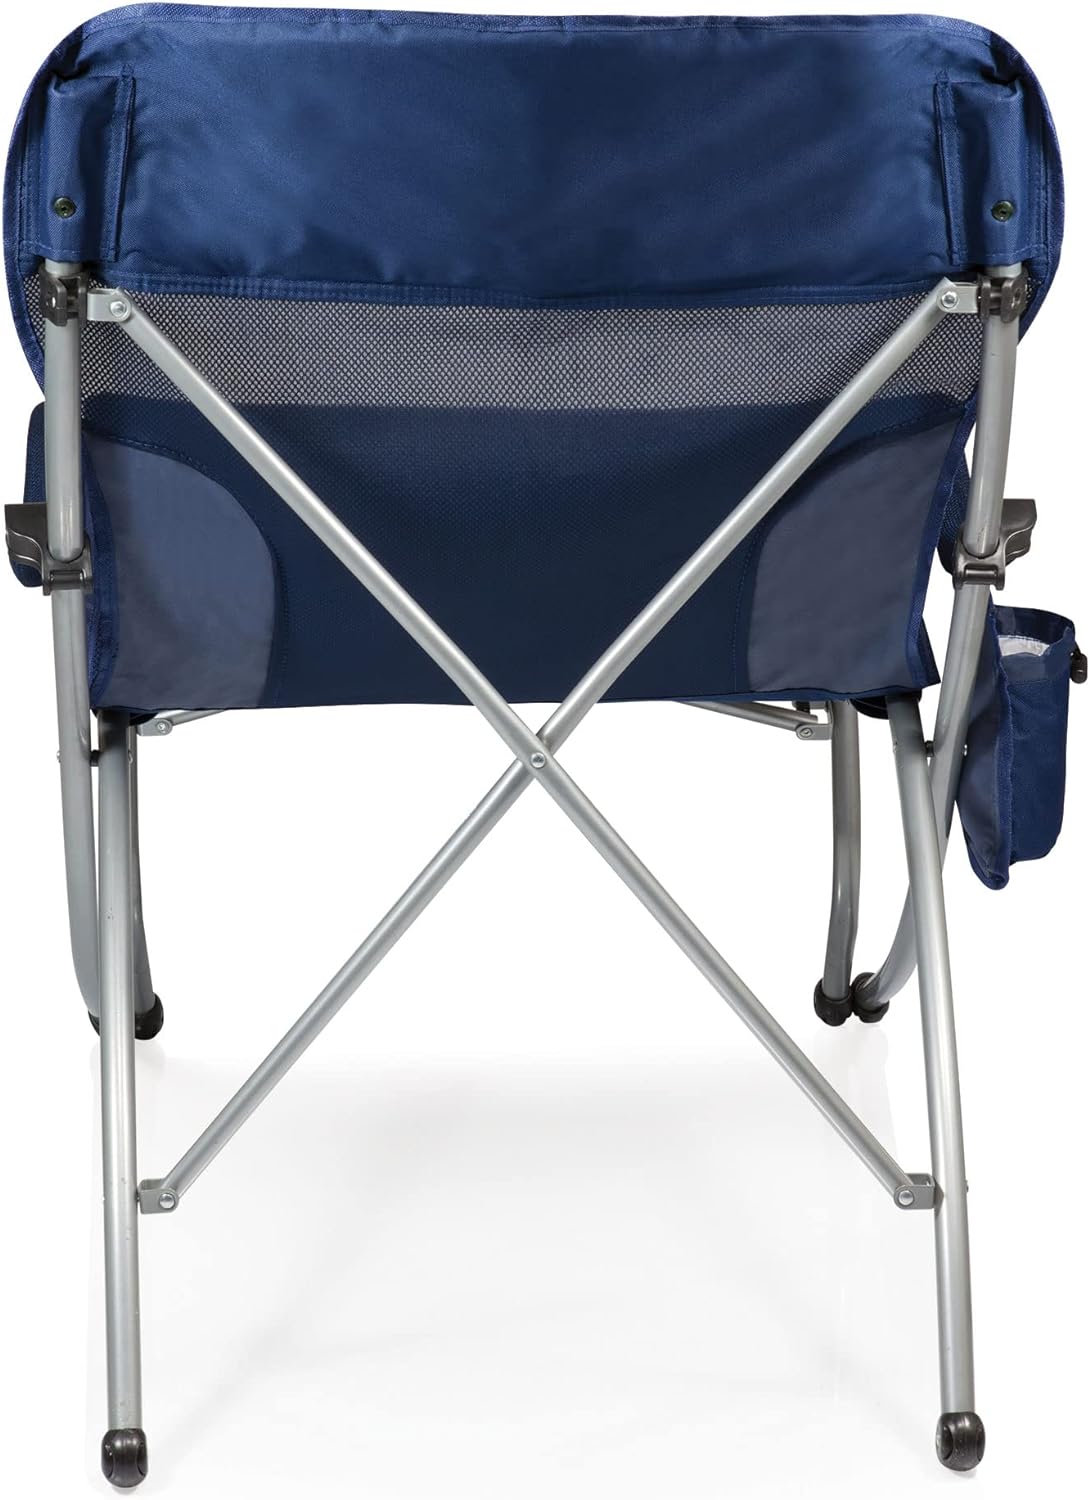 ONIVA - a Picnic Time Brand - PT-XL Heavy Duty Camping Chair, XL Beach Chair, 400 lb Capacity Outdoor Folding Camp Chair